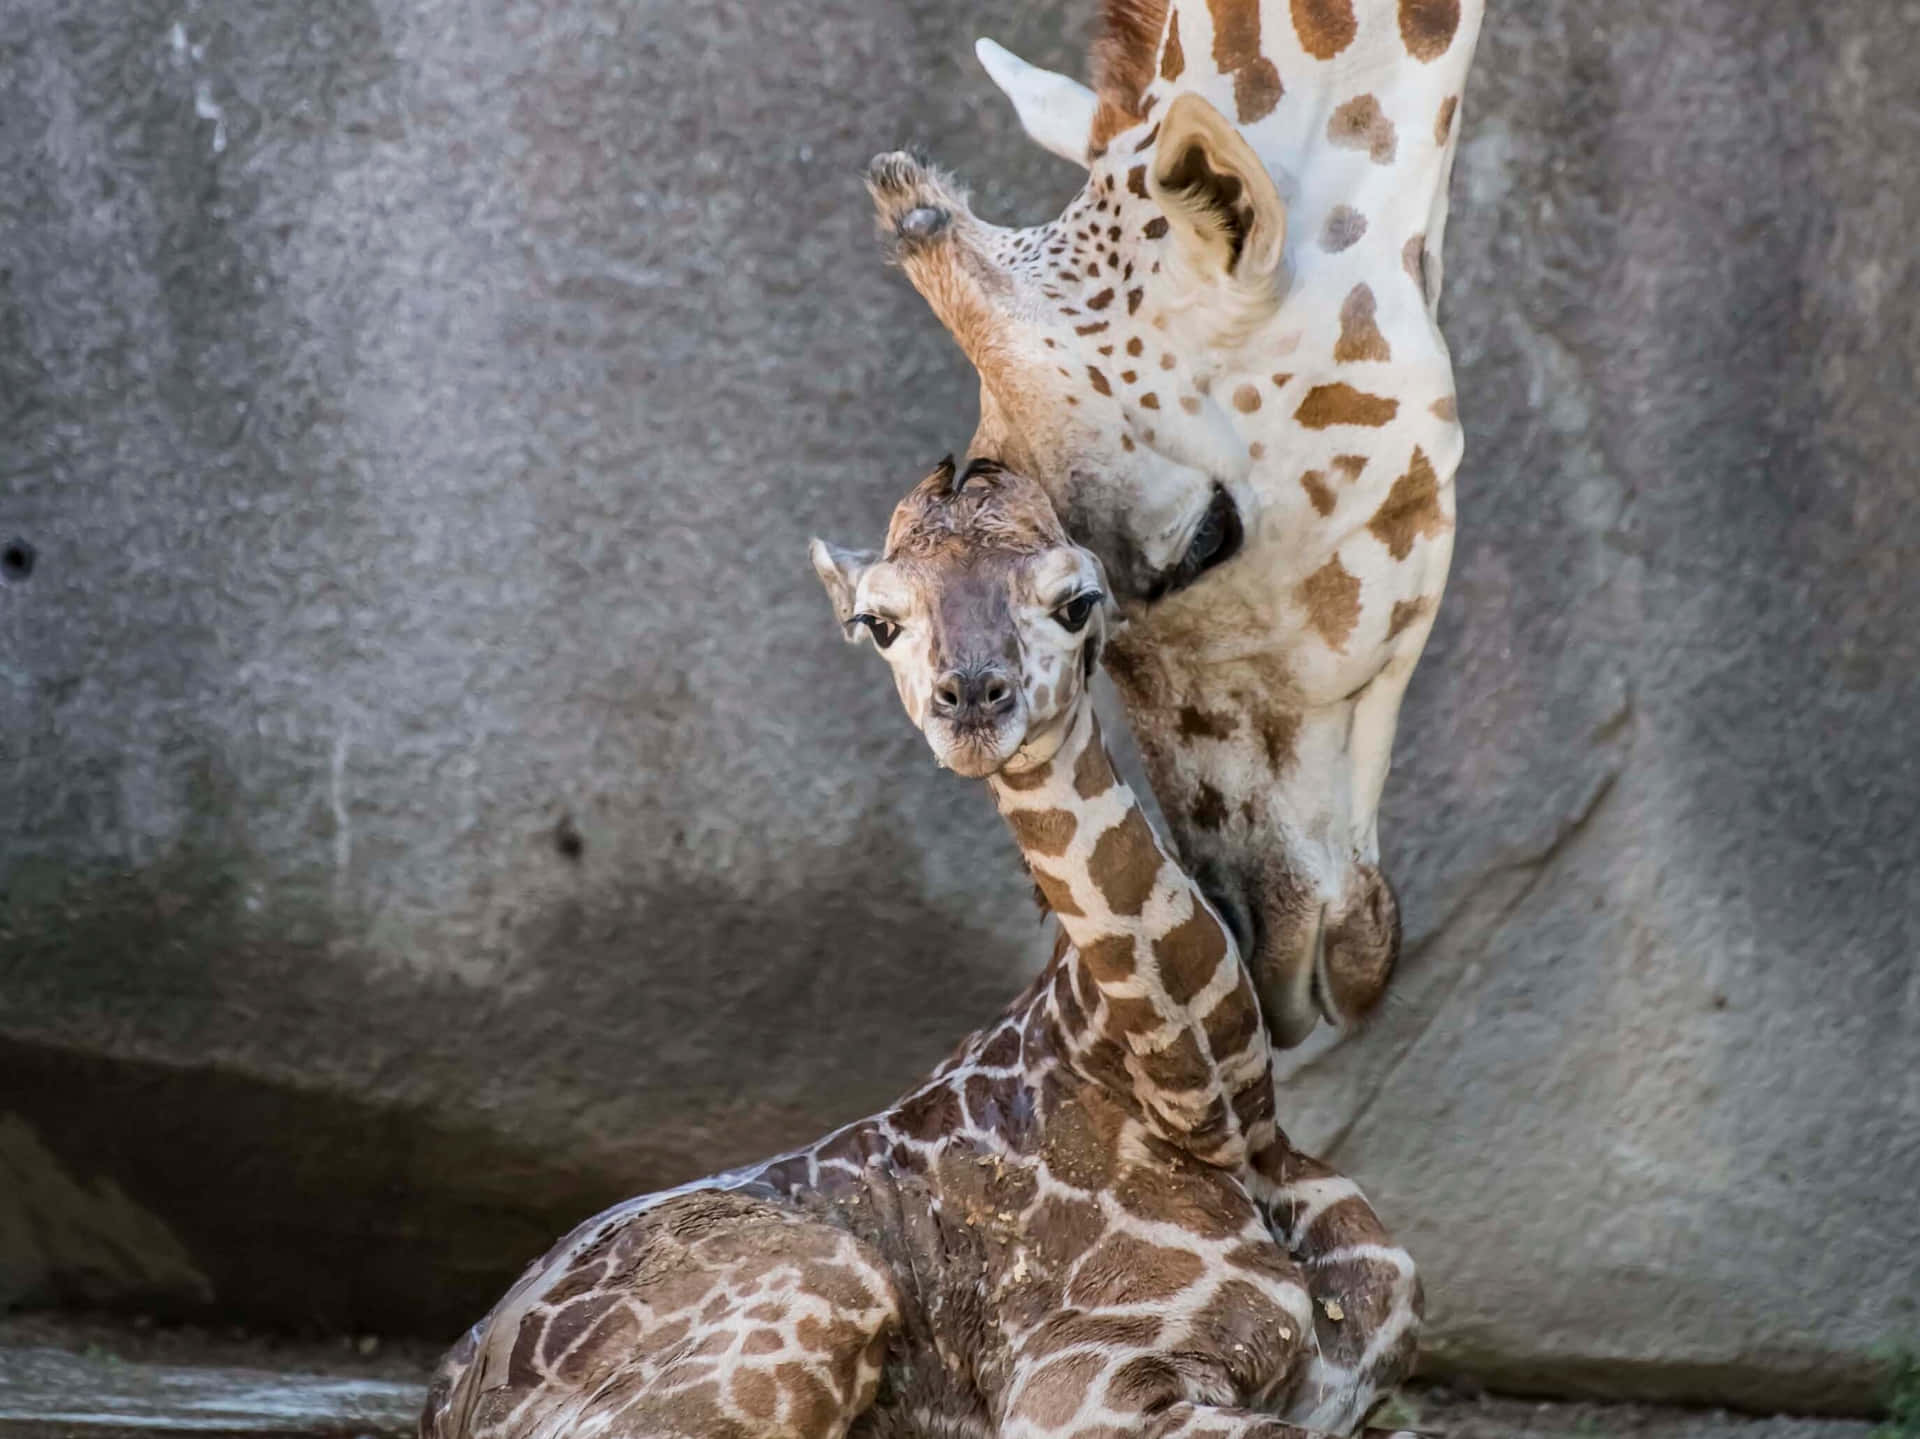 A Giraffe Is Holding A Baby In Its Mouth